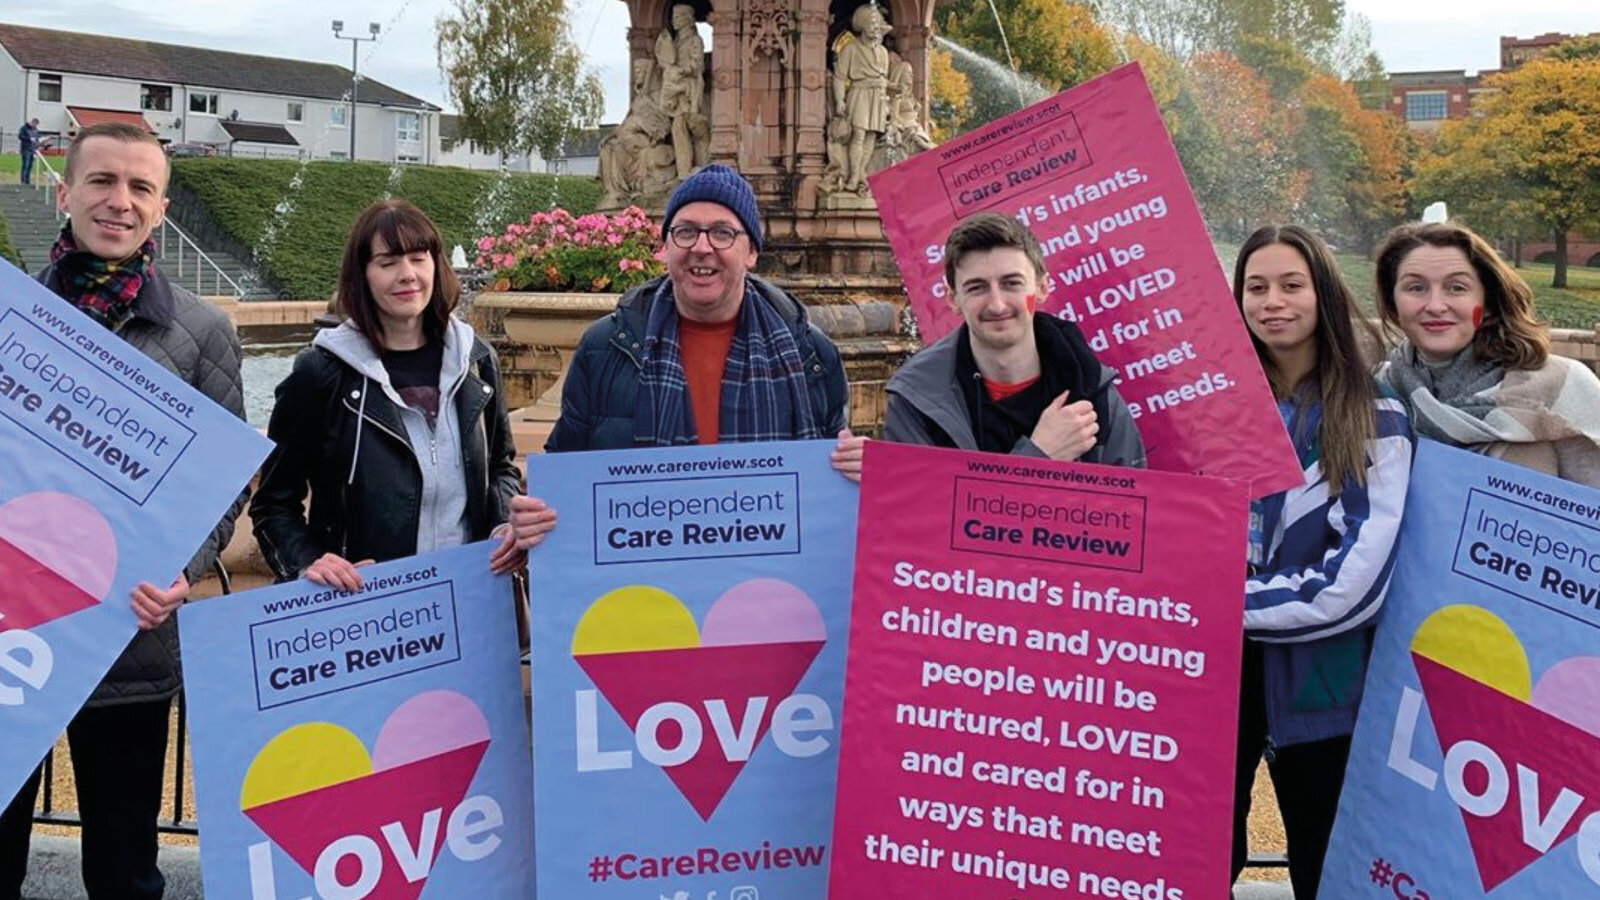 Independent-care-review-campaign1.jpg